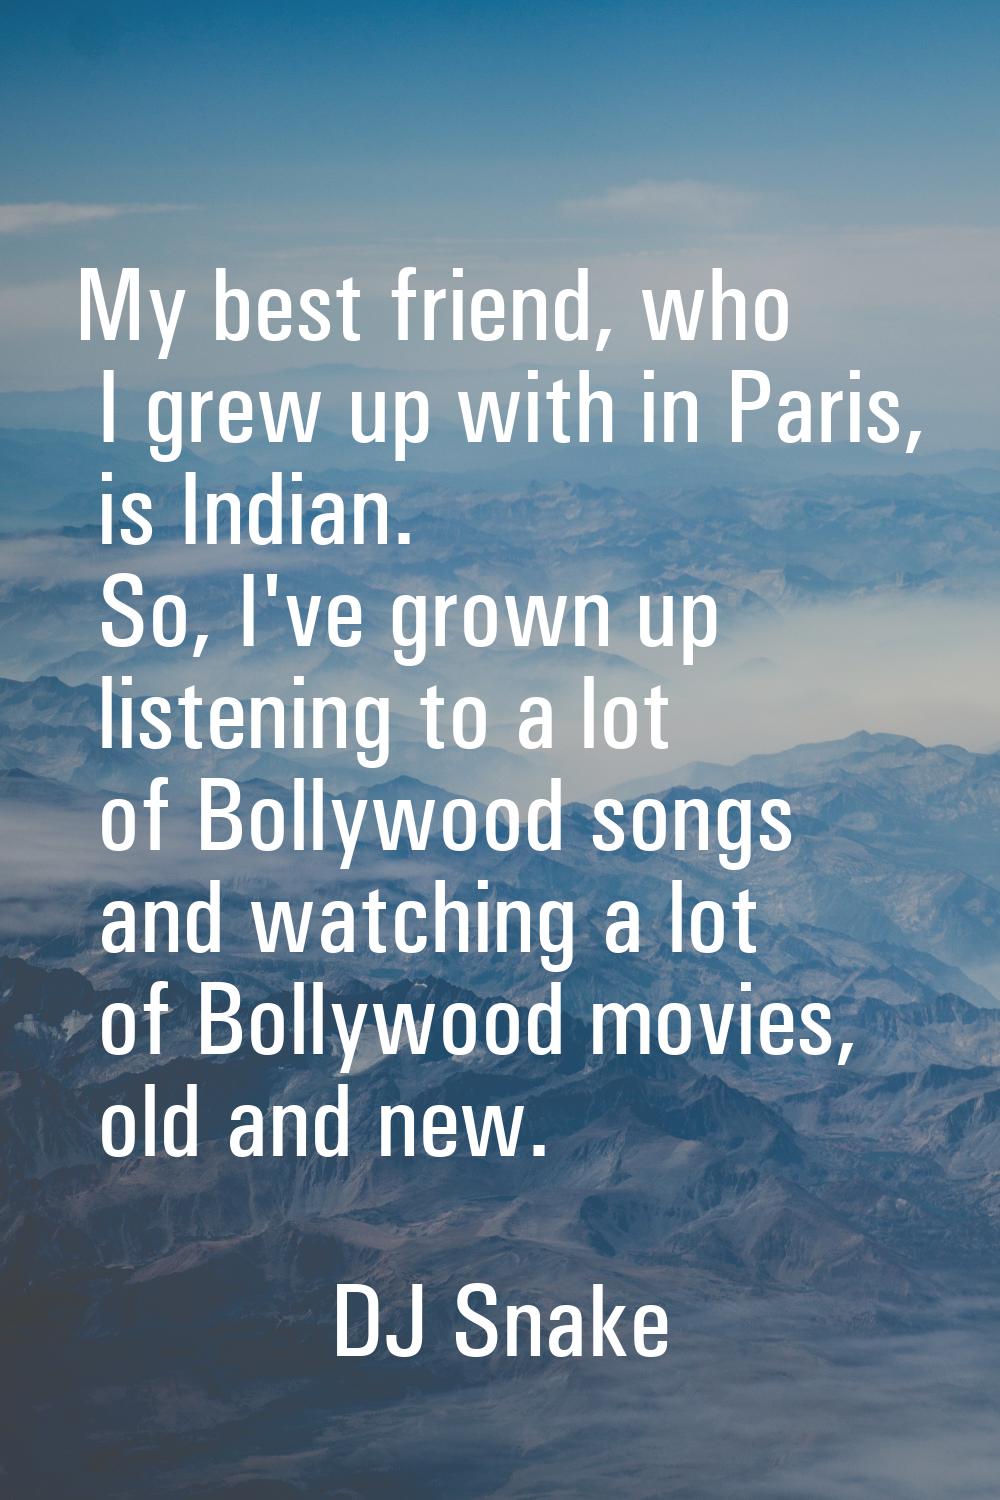 My best friend, who I grew up with in Paris, is Indian. So, I've grown up listening to a lot of Bol